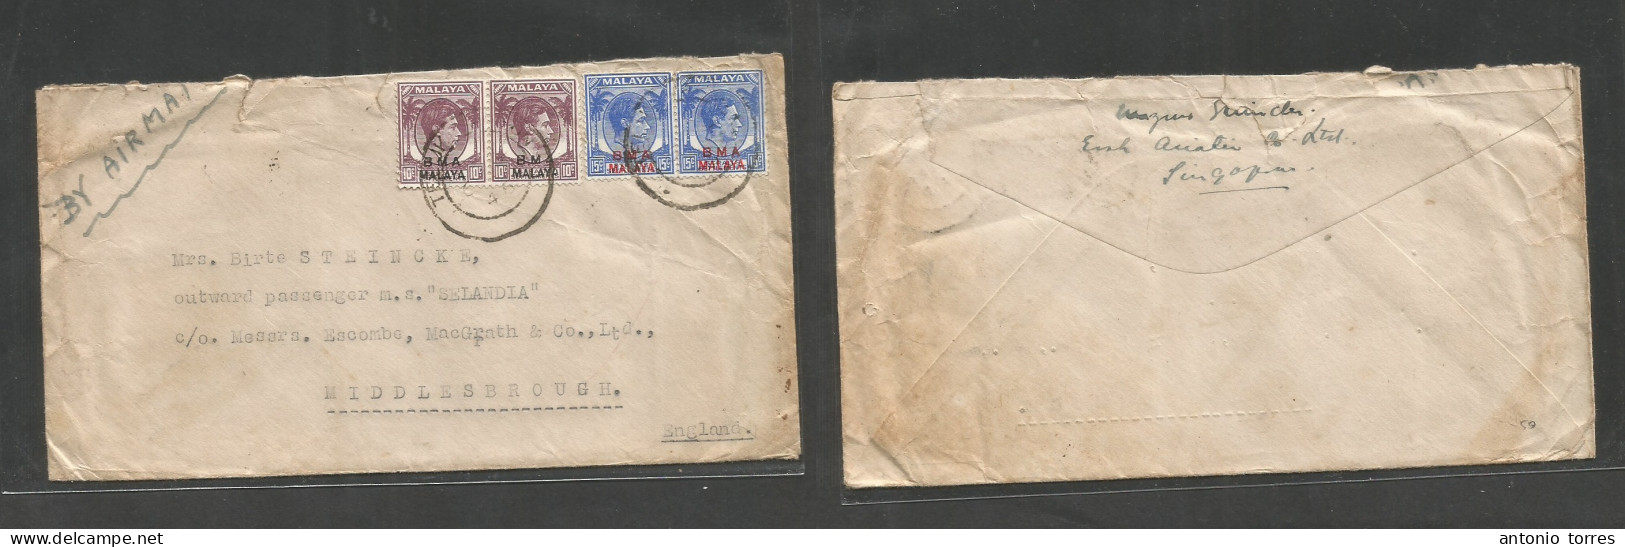 Malaysia. 1945 (6 Oct) BMA. Teluk Anson - England, Middleborough. Air Multifkd Env At 50c Rate, Cds. Fine. - Malesia (1964-...)